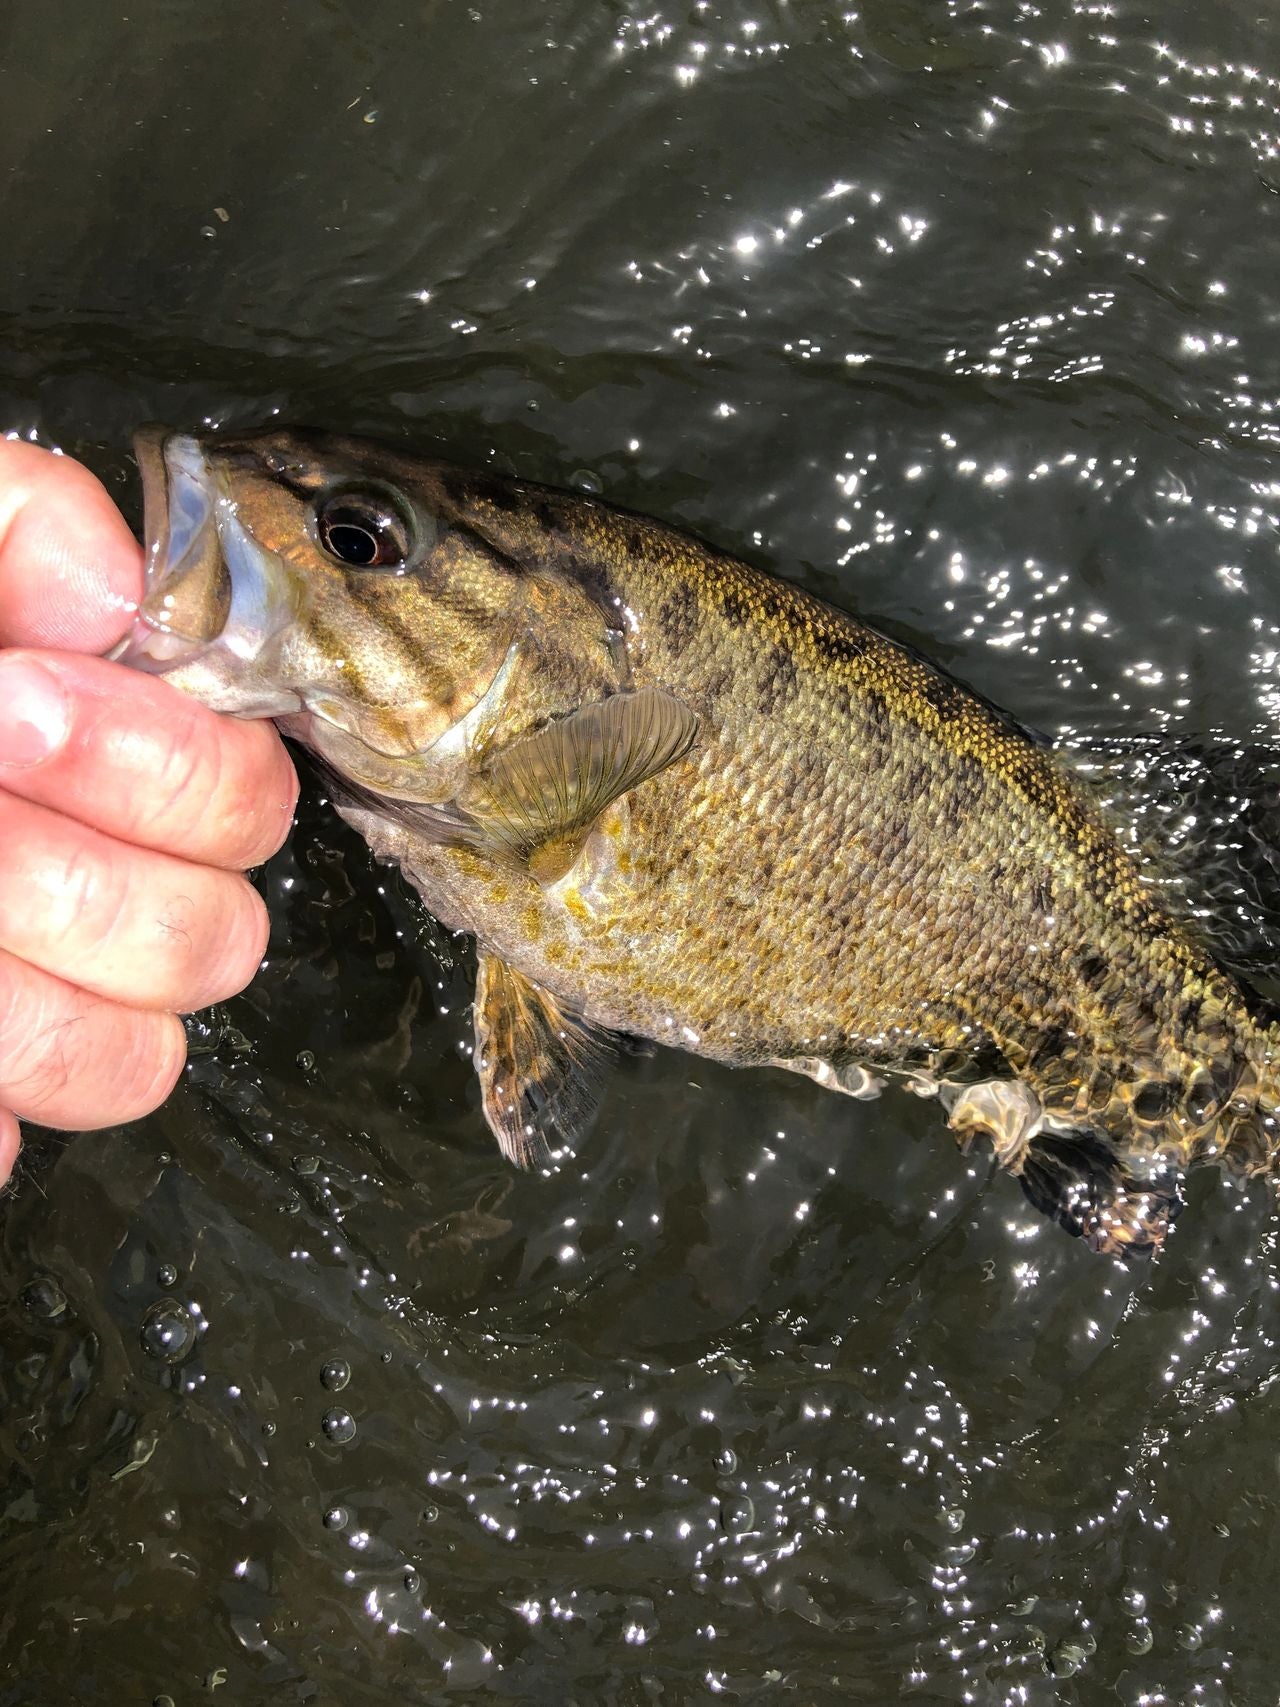 Escape from Quarantine, Iowa Smallmouth Bass on the Fly